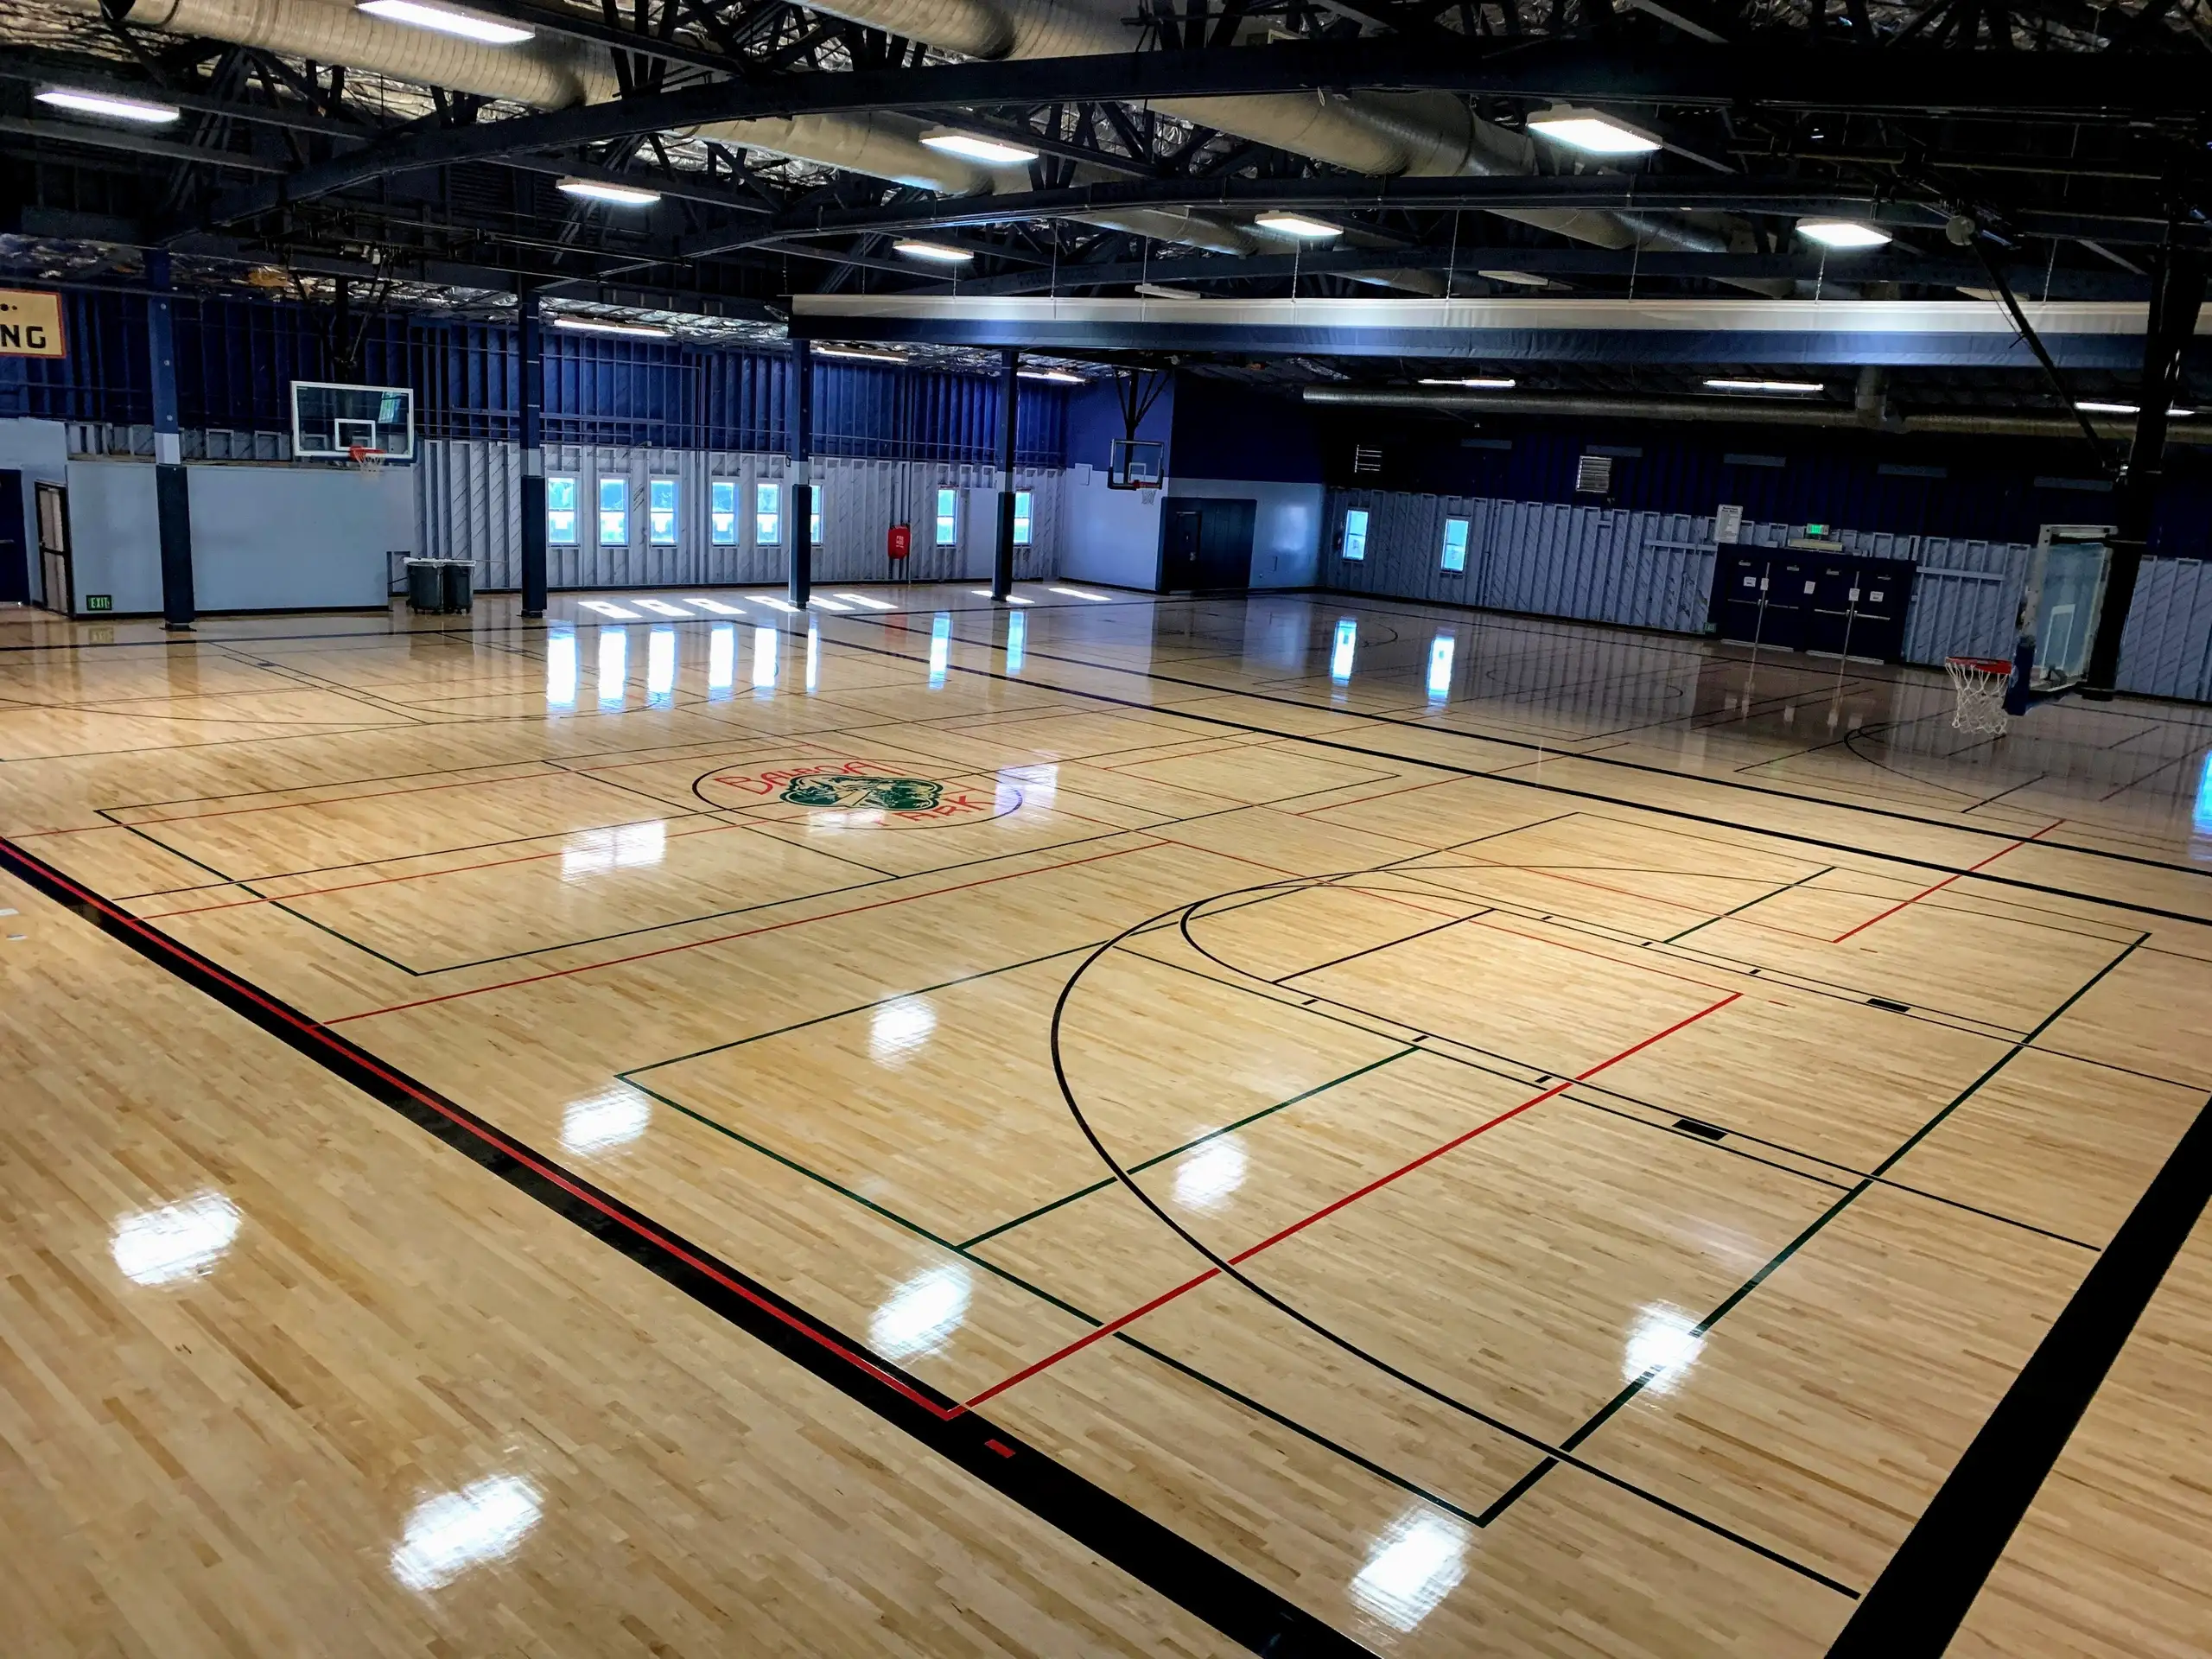 An interior view of the municipal gym with a basketball court.